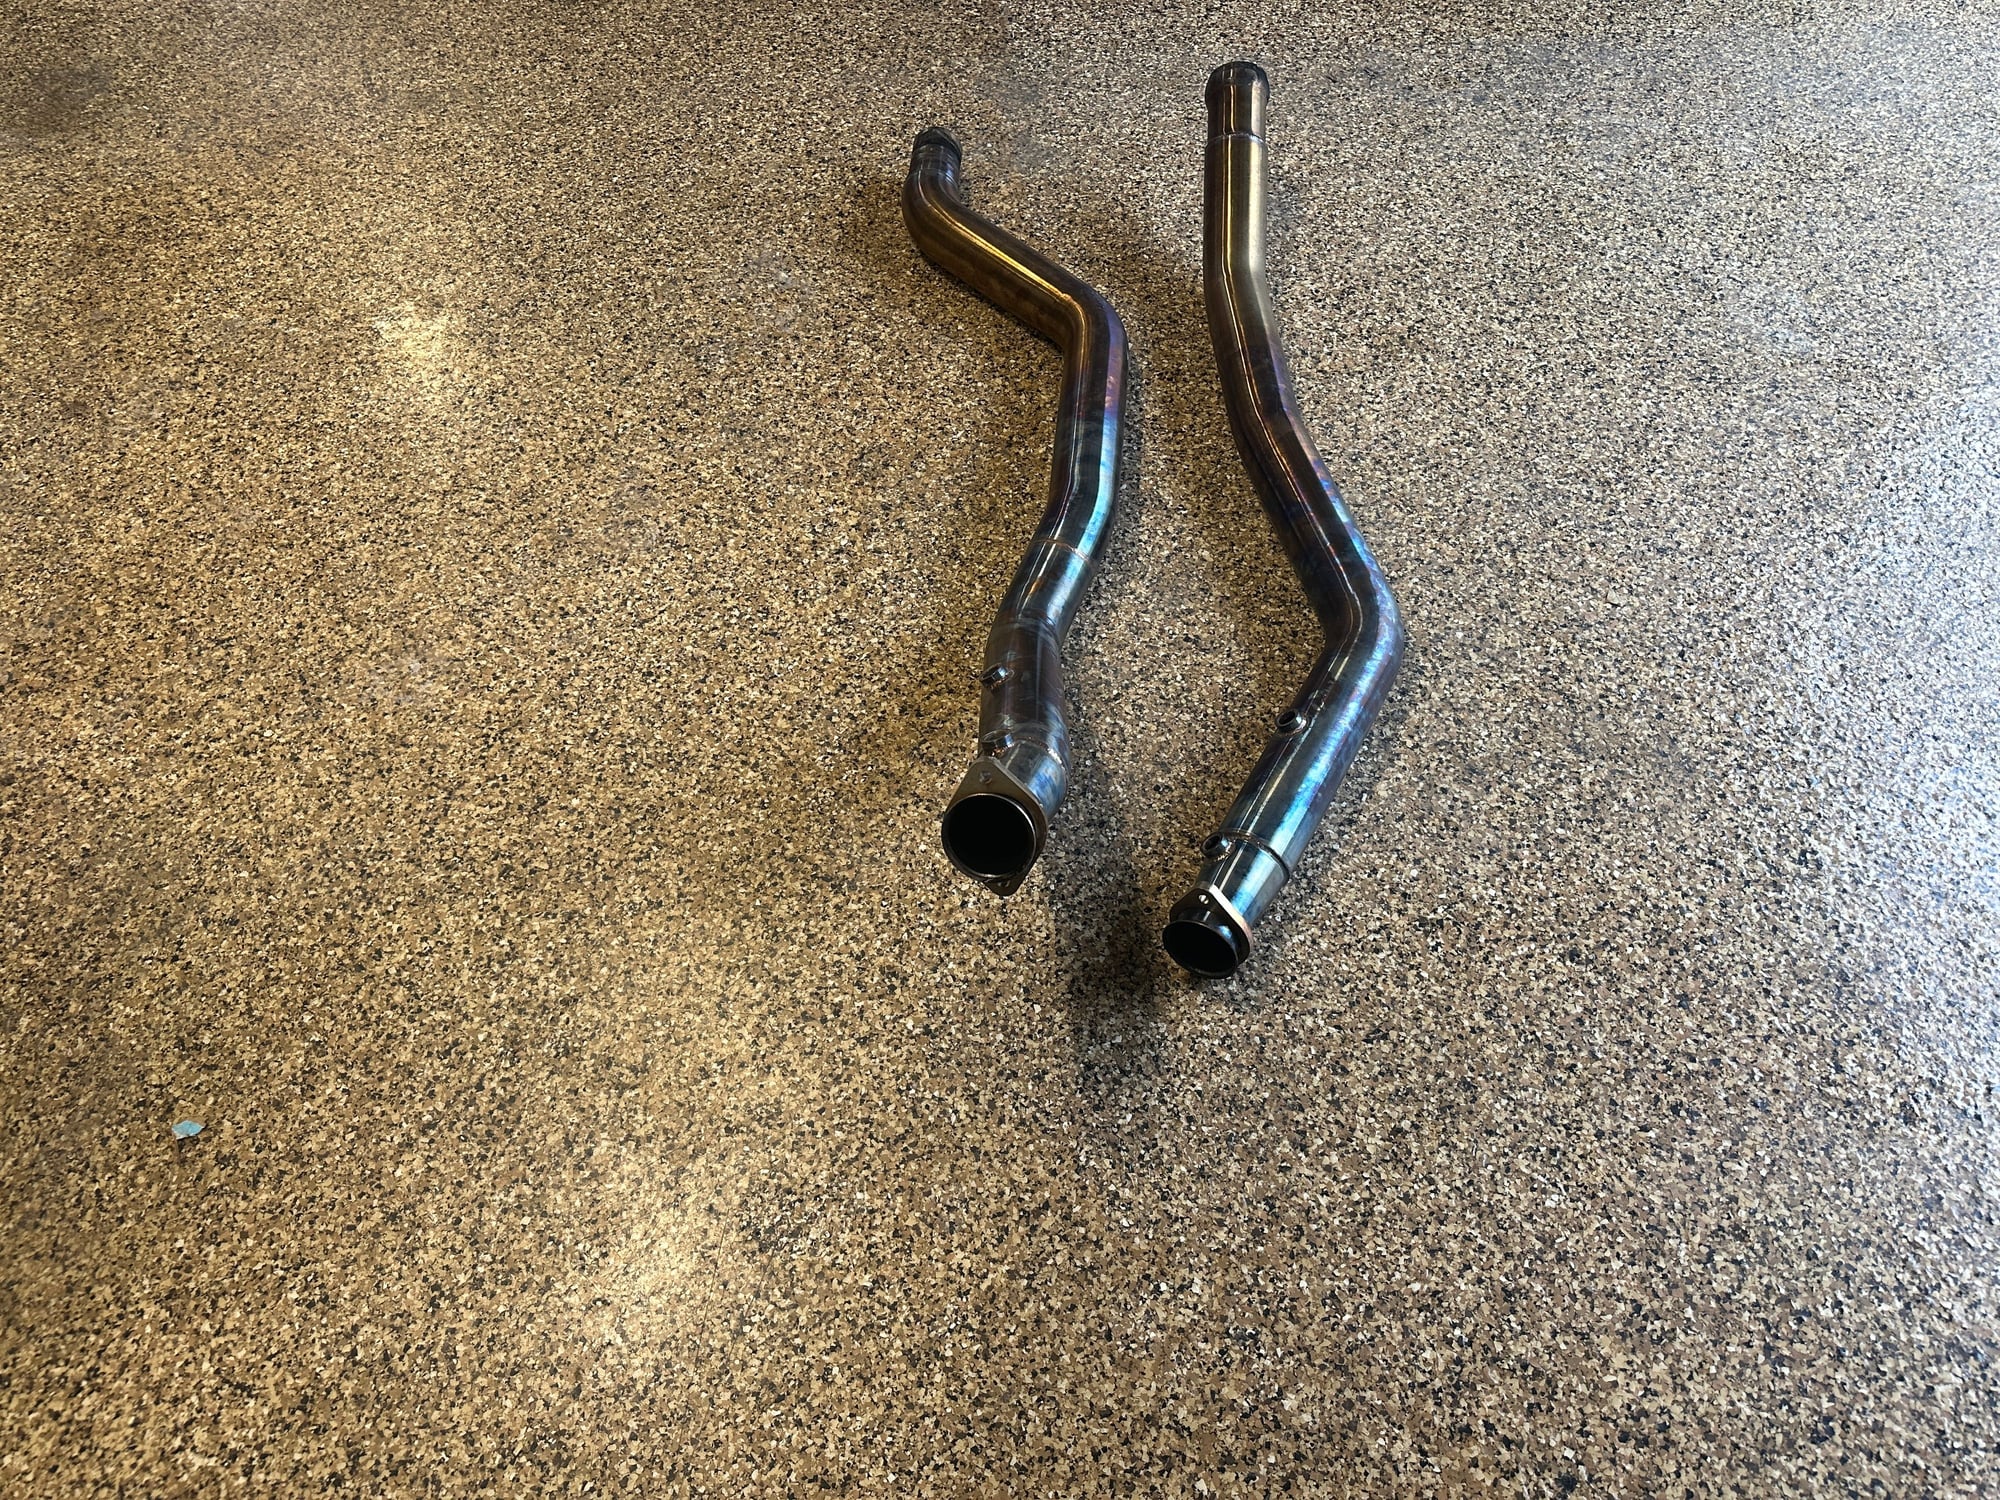 Engine - Exhaust - ML63 Dowbpipes - Used - 2013 to 2016 Mercedes-Benz ML63 AMG - New Cumberland, PA 17070, United States